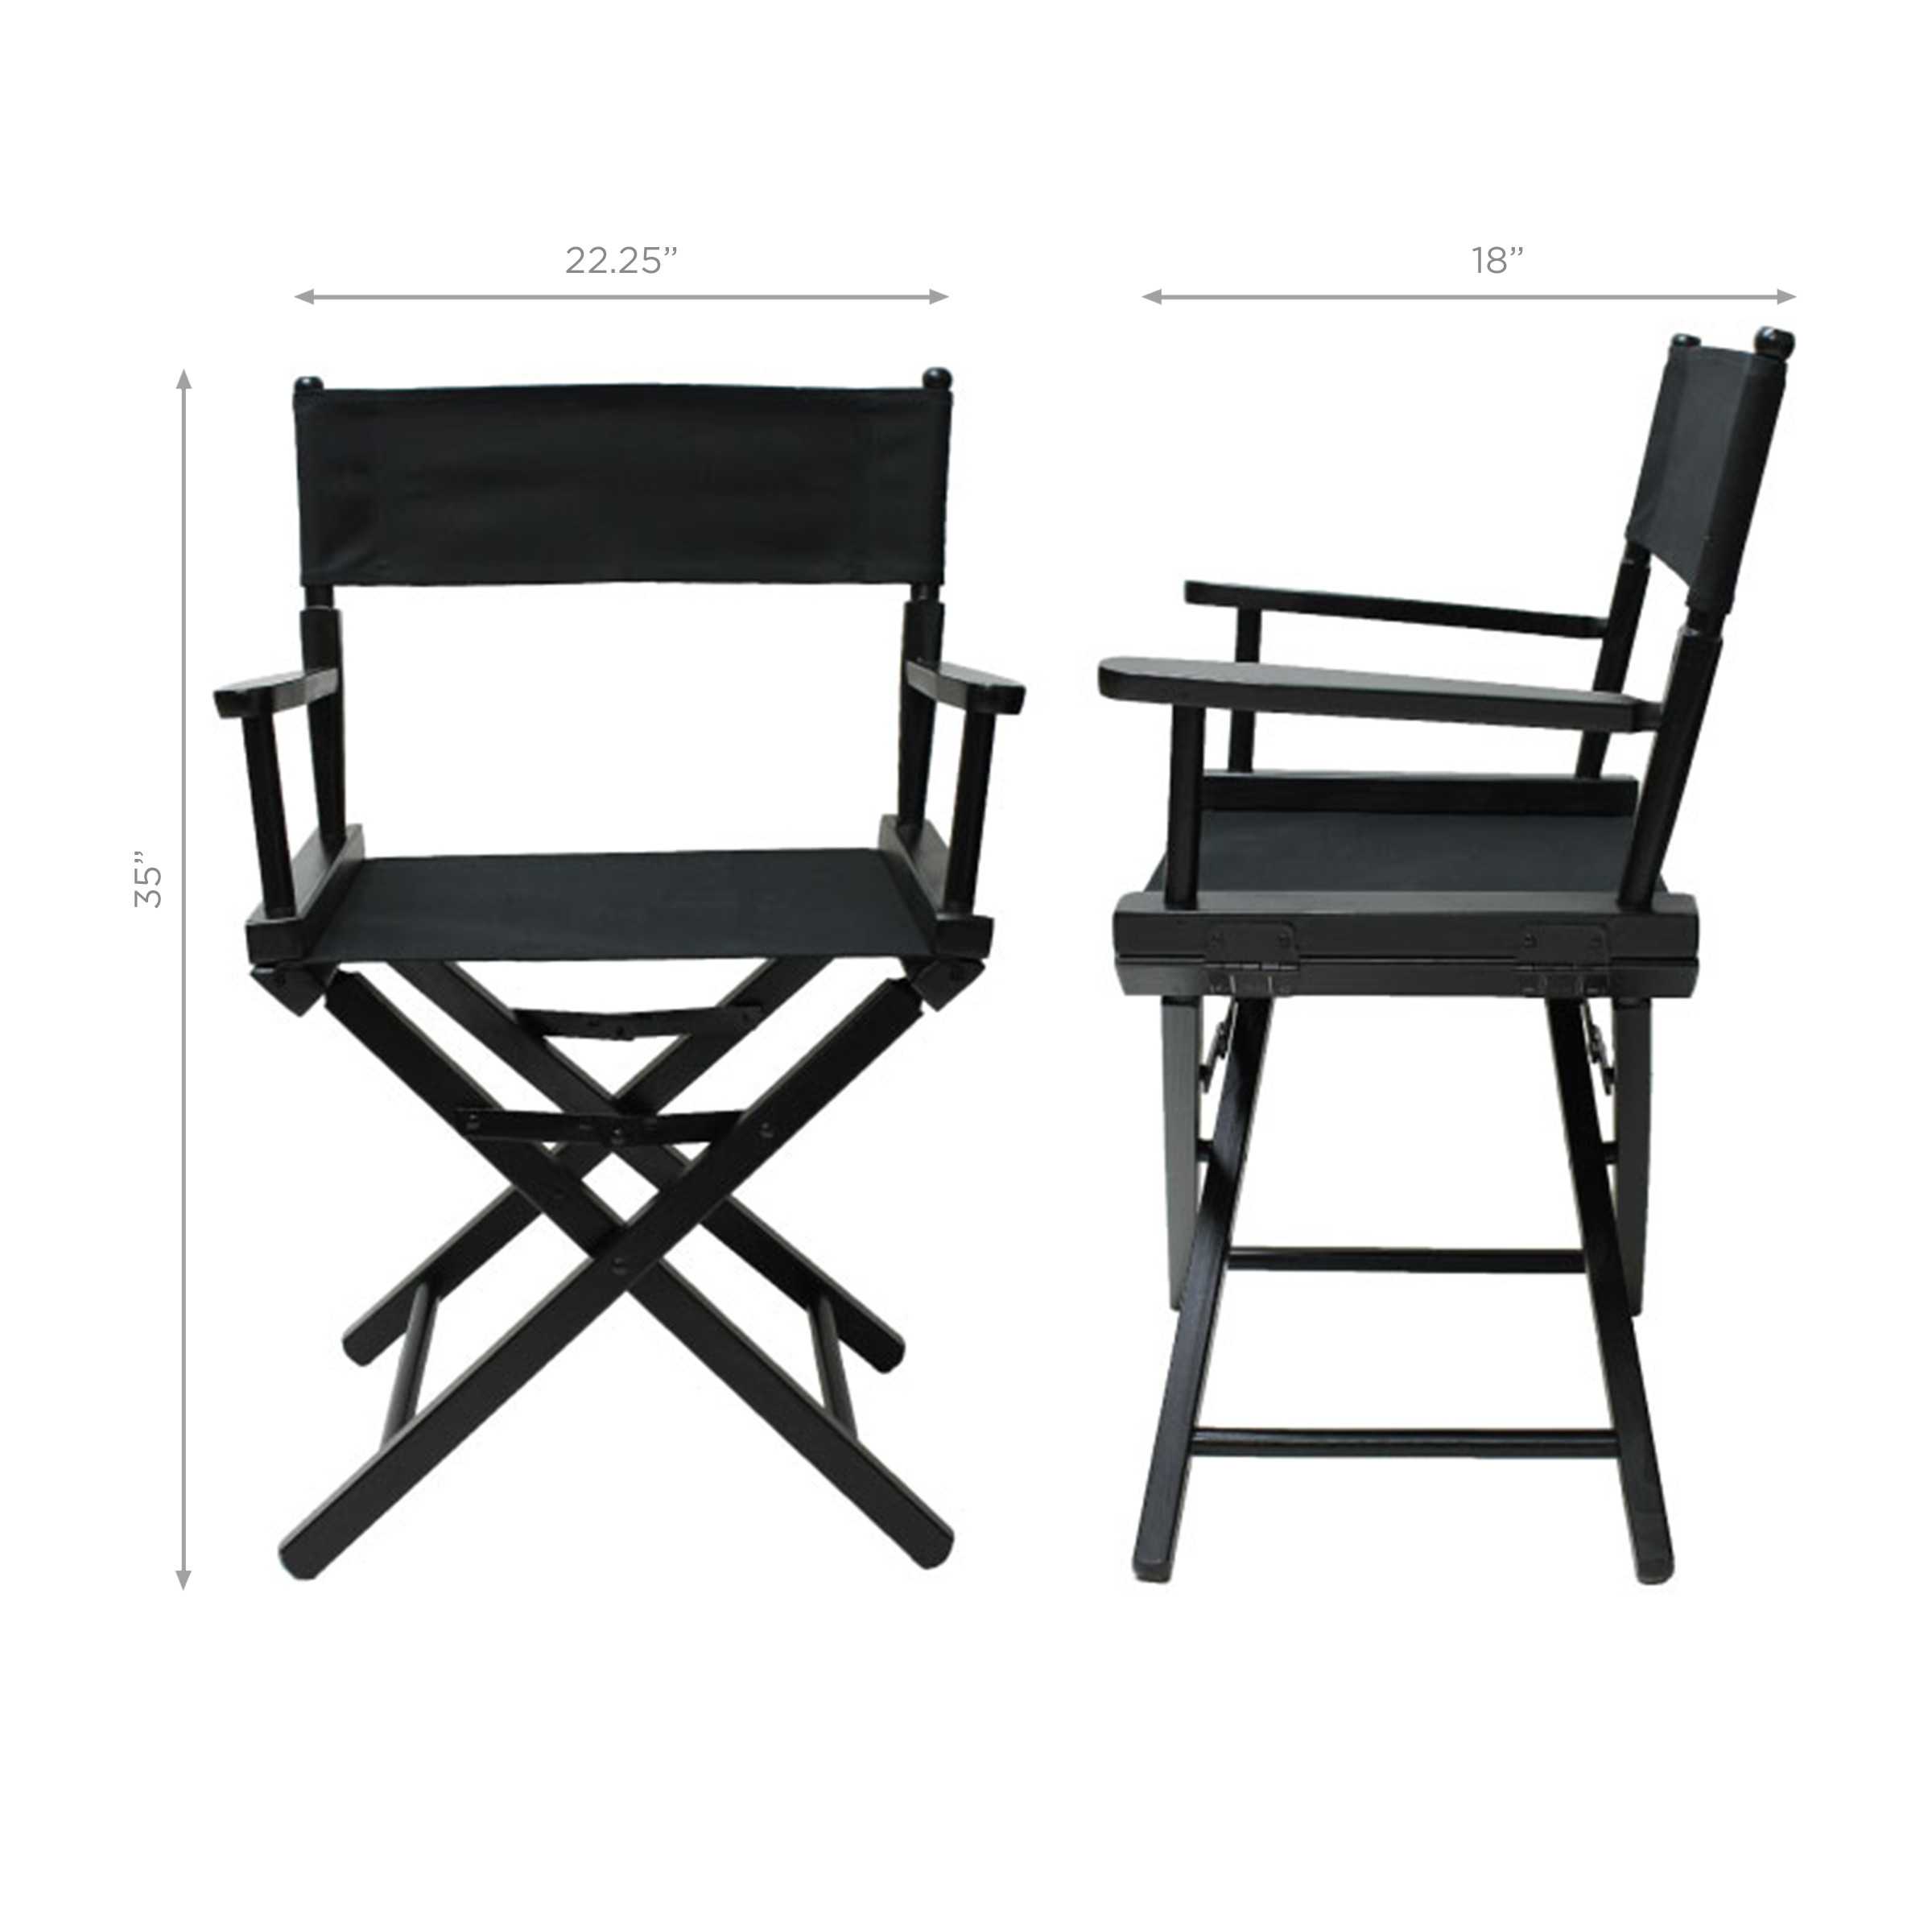 CENTRAL FLORIDA UNIVERSITY DIRECTORS CHAIR-TABLE HEIGHT